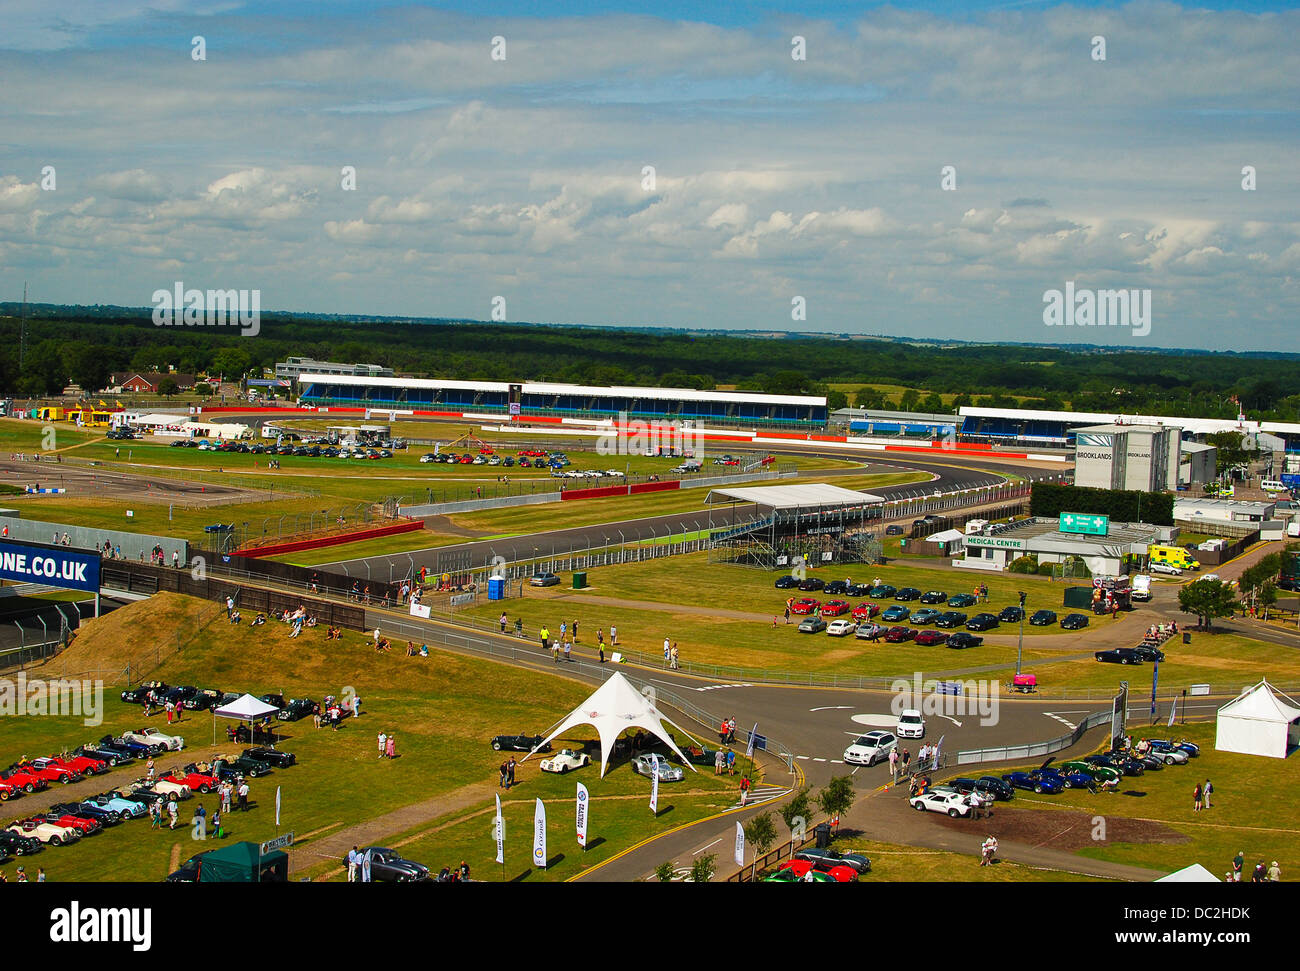 Aerial view of Silverstone race circuit Stock Photo